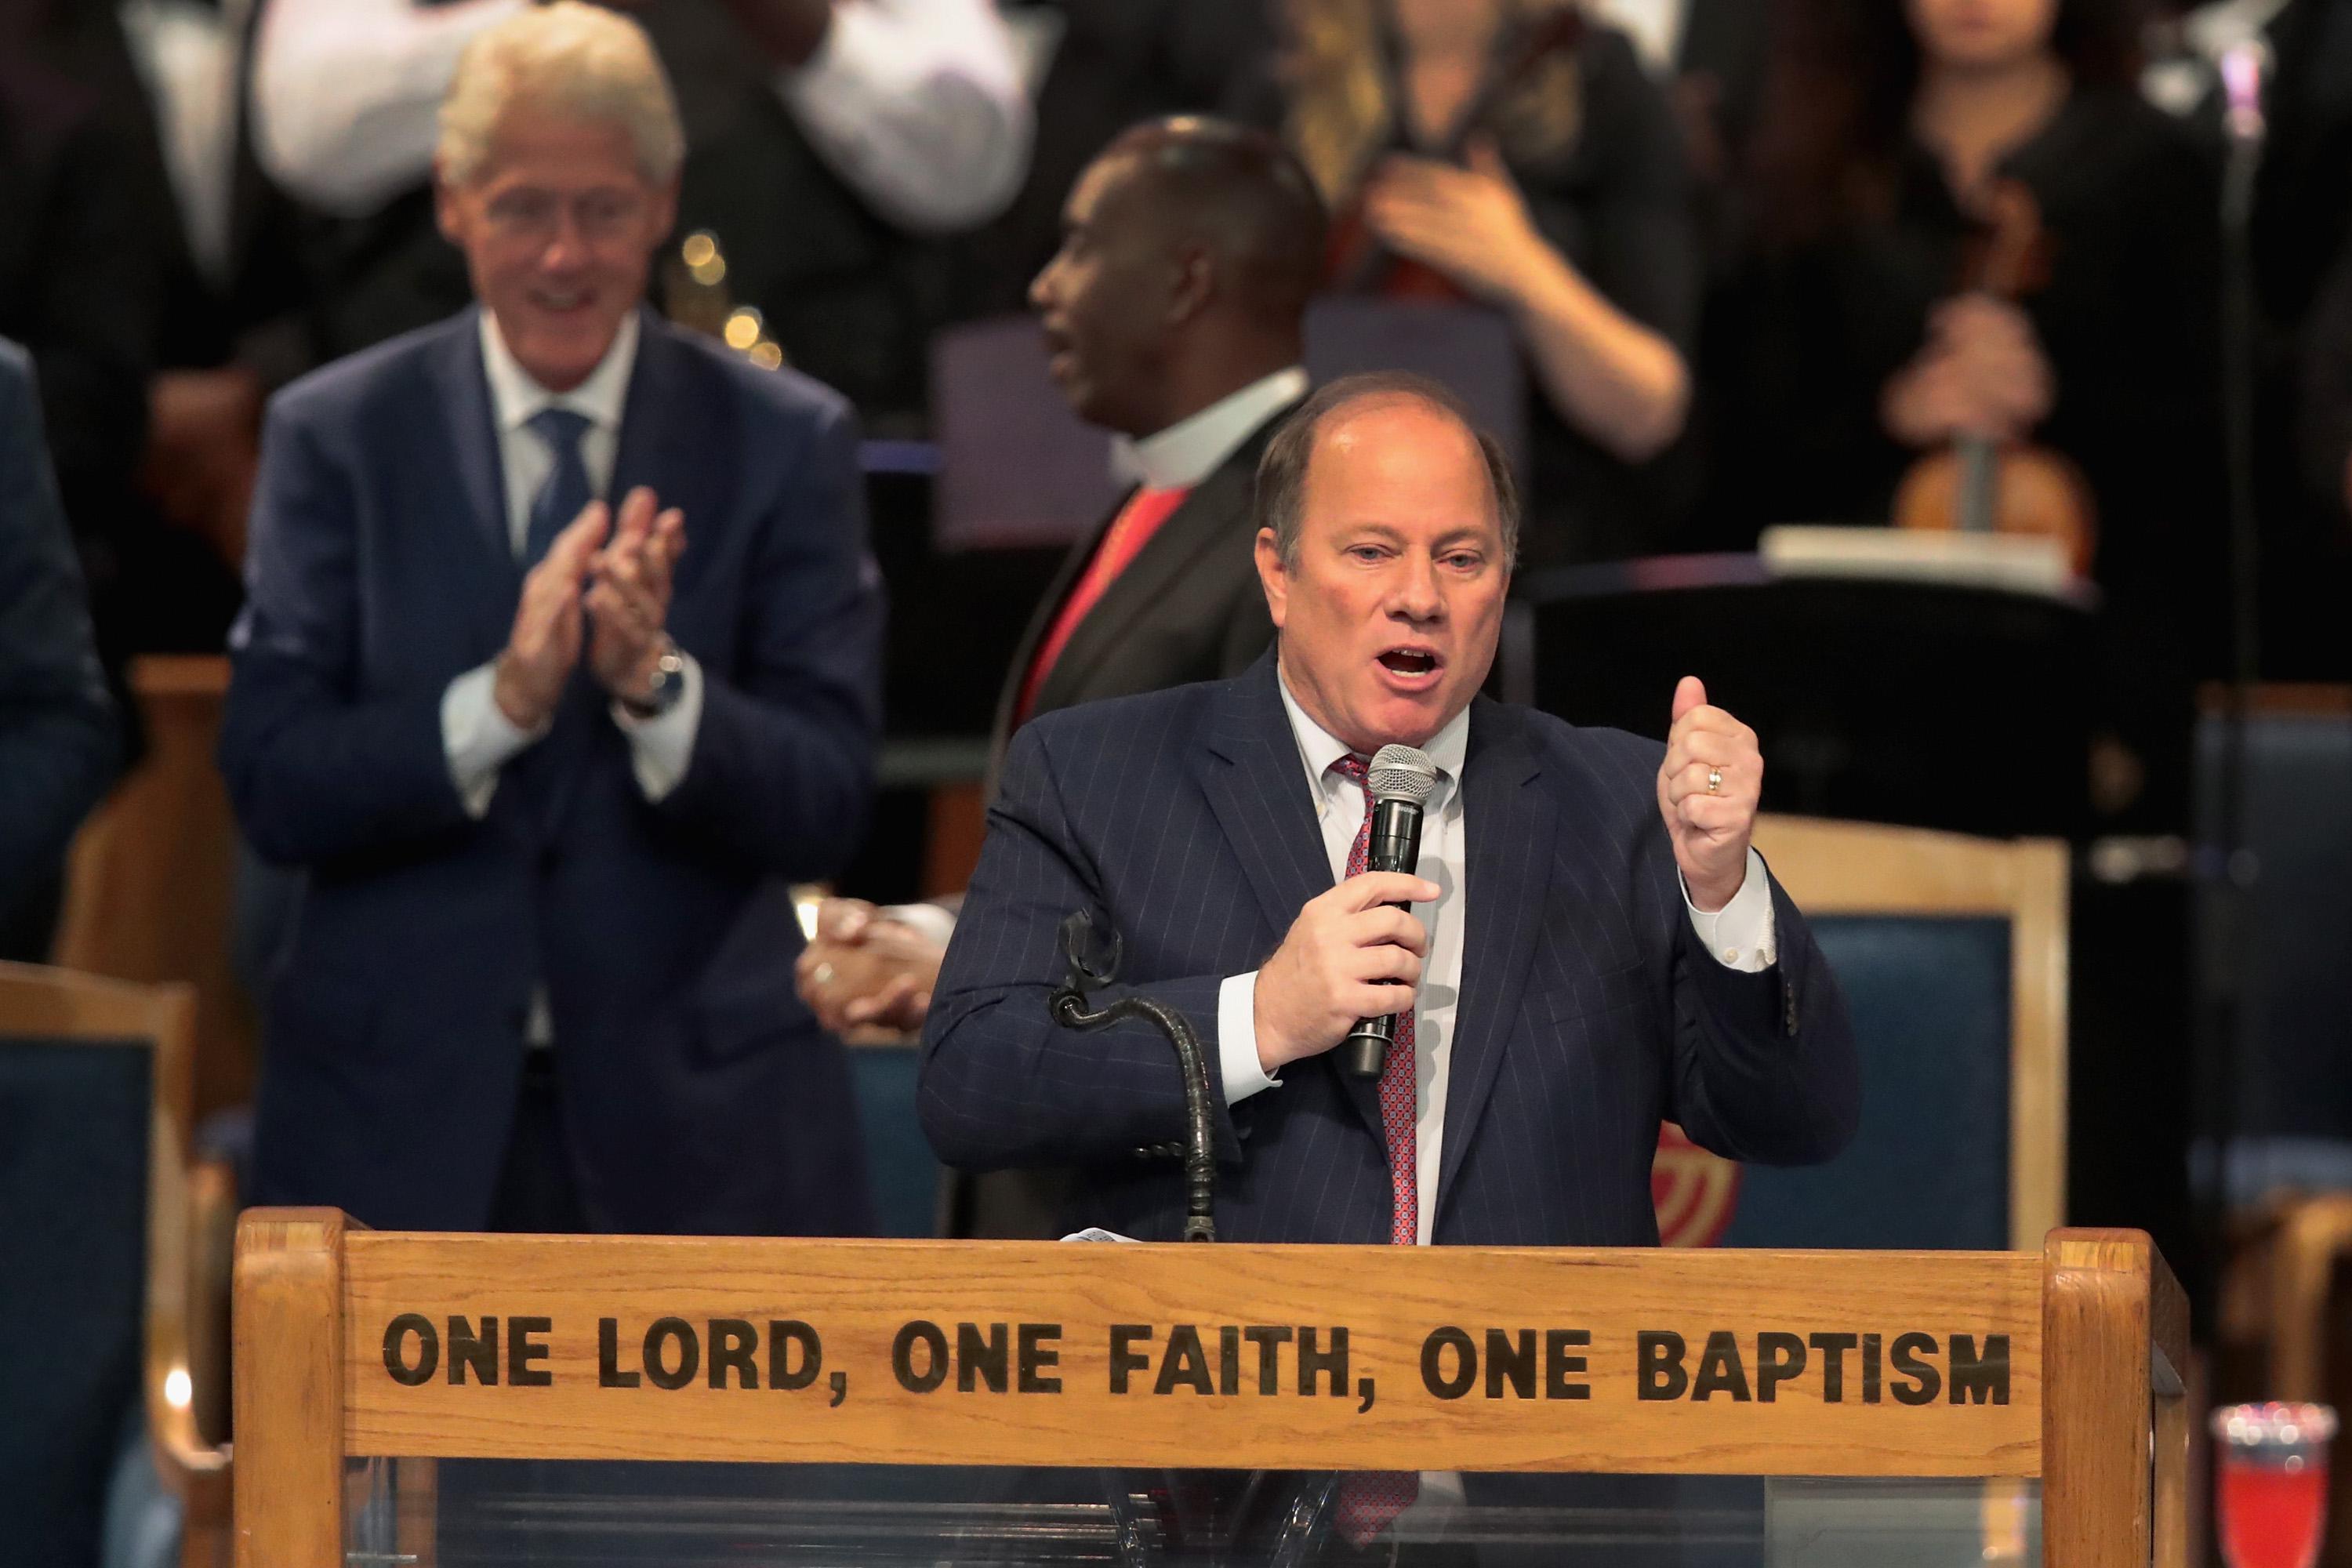 Mike Duggan stands on a pulpit with the words "One Lord, One Faith, One Baptism" on it.